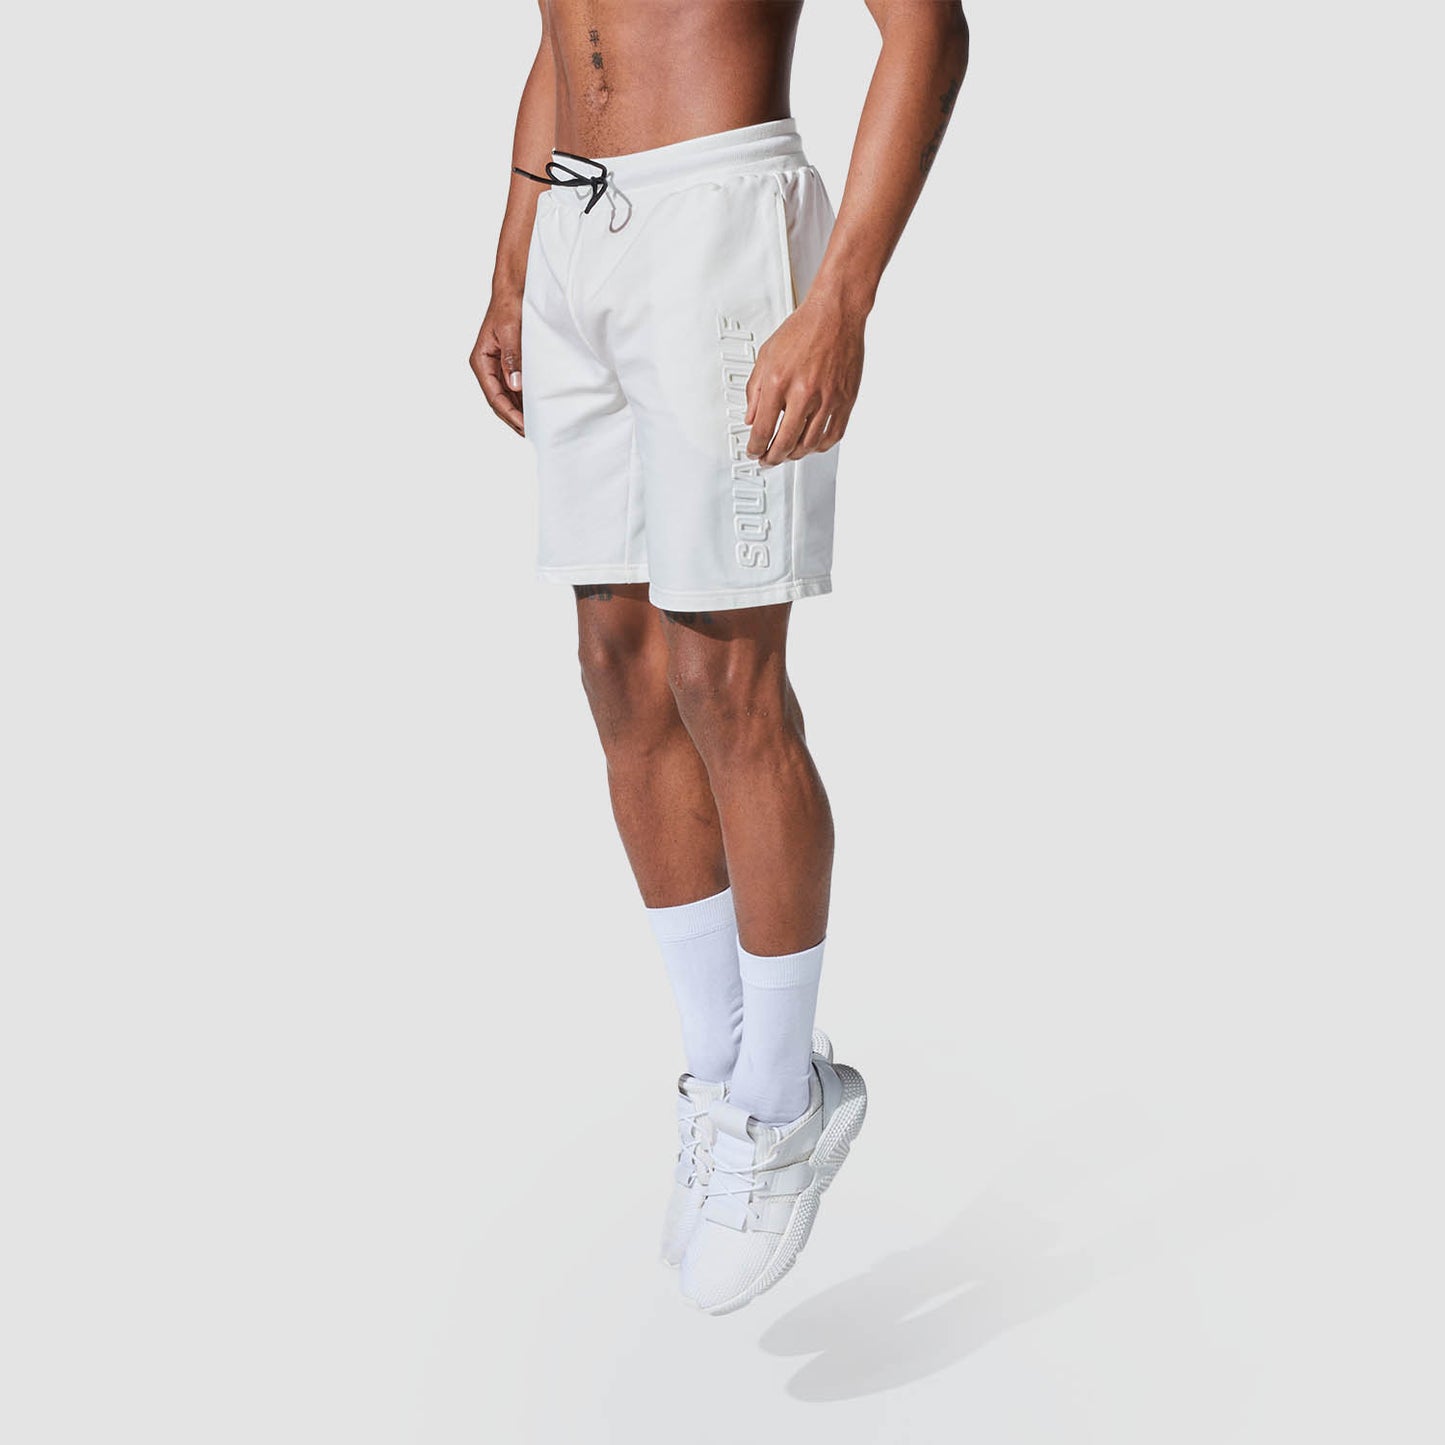 squatwolf-gym-wear-graphic-wordmark-jogger-shorts-white-workout-shorts-for-men